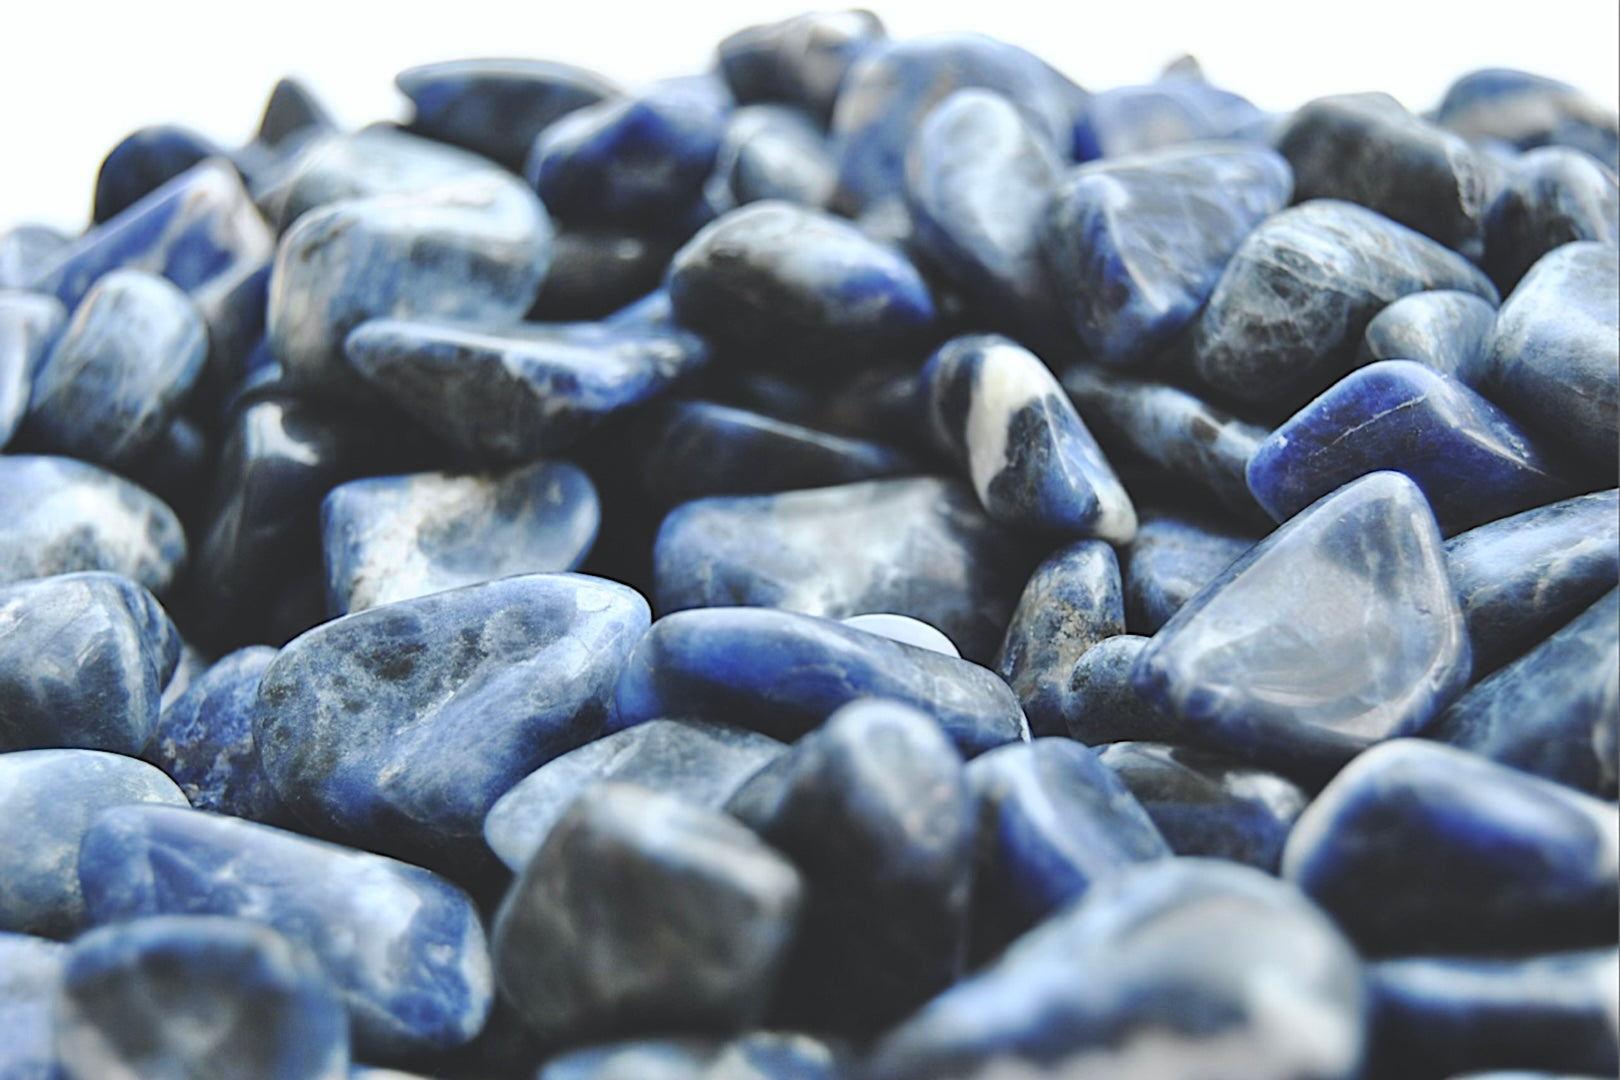 A close up view of an assortment of sodalite stones. The stones are various hues of blue with swirls of white on them.